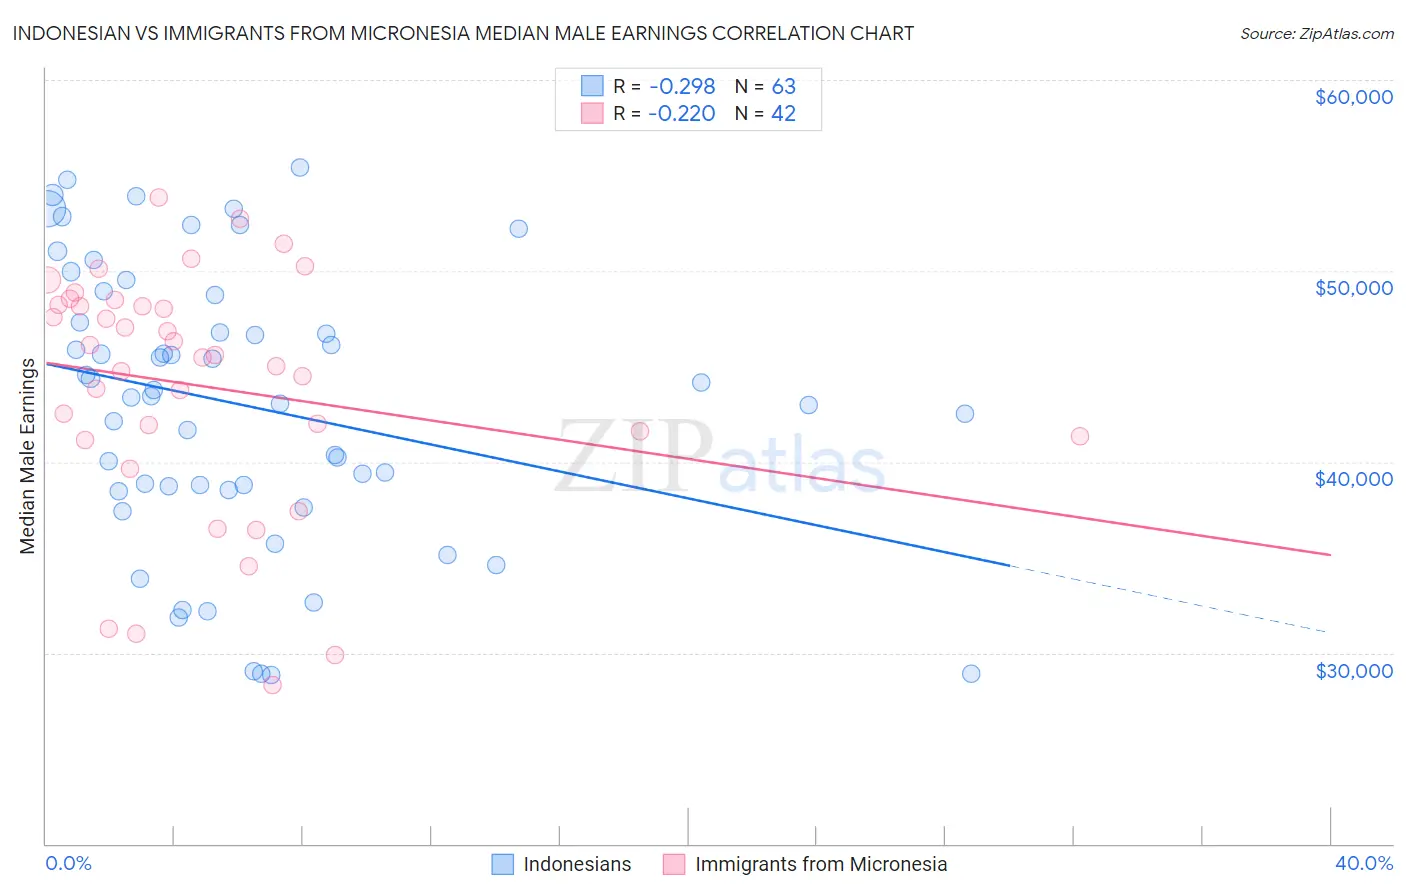 Indonesian vs Immigrants from Micronesia Median Male Earnings